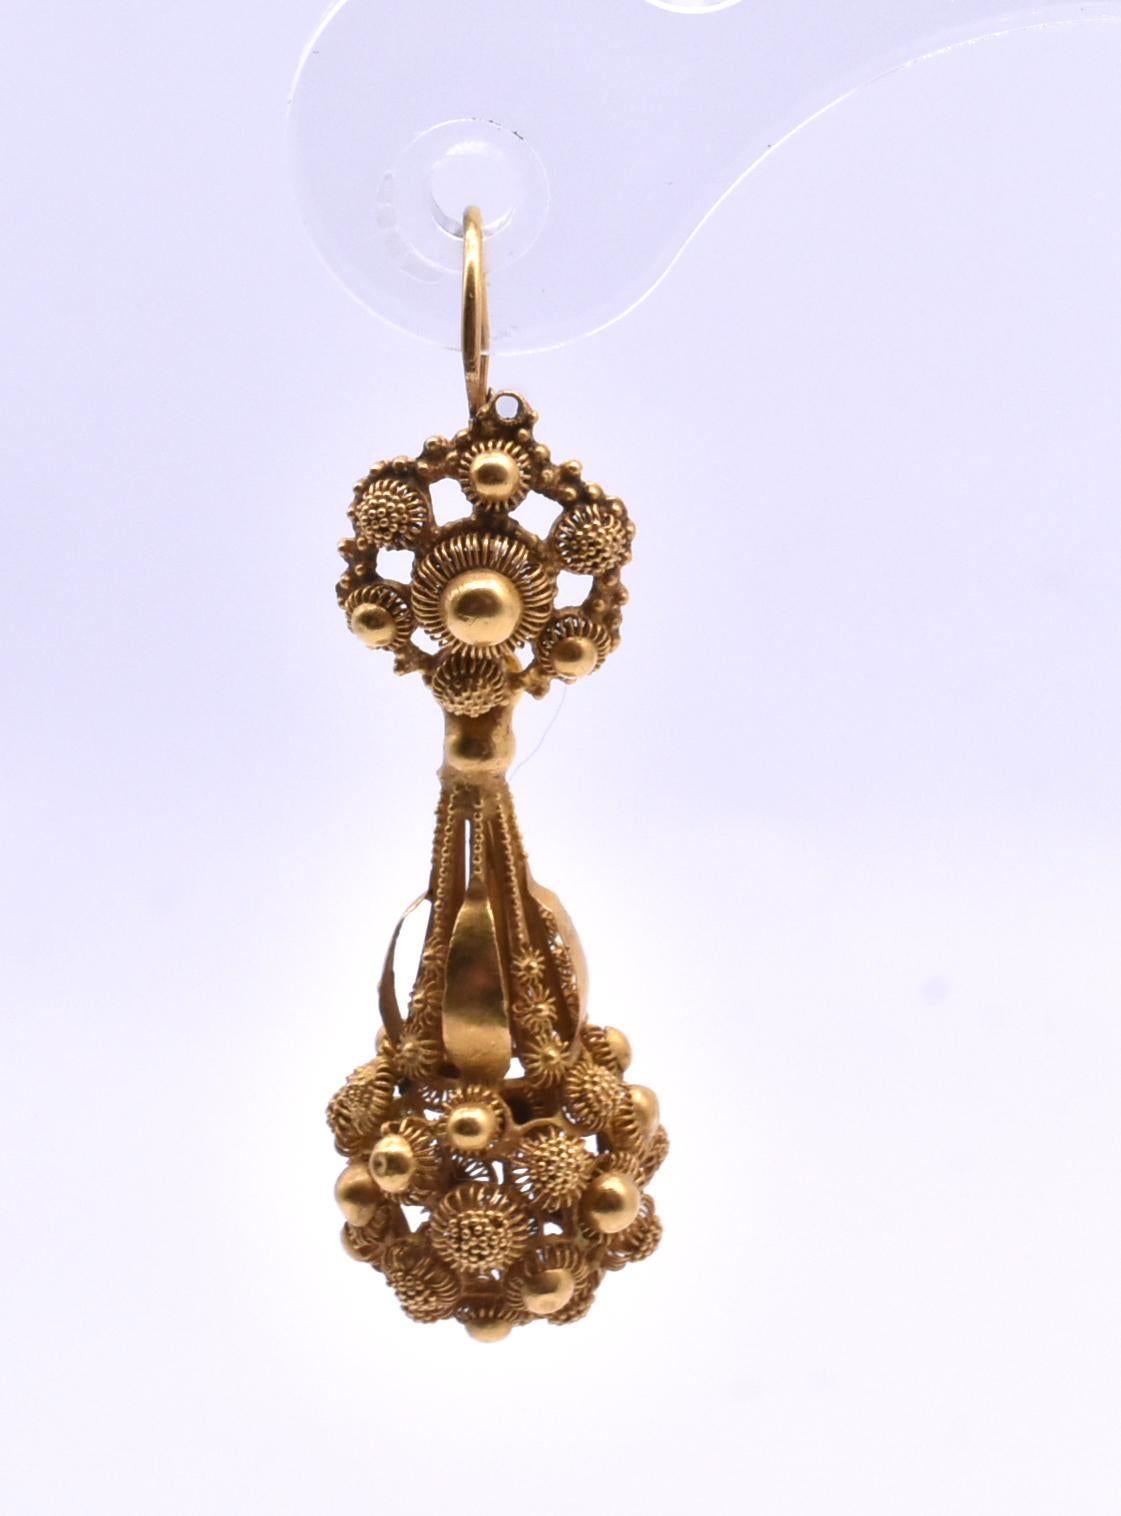 These lovely 18Kday-night floral cannetille earrings boast an incredible example of fine cannetille gold work. Popular in both England and France in the 1820's, cannetille was a type of filigree work named after the gold embroideries of the